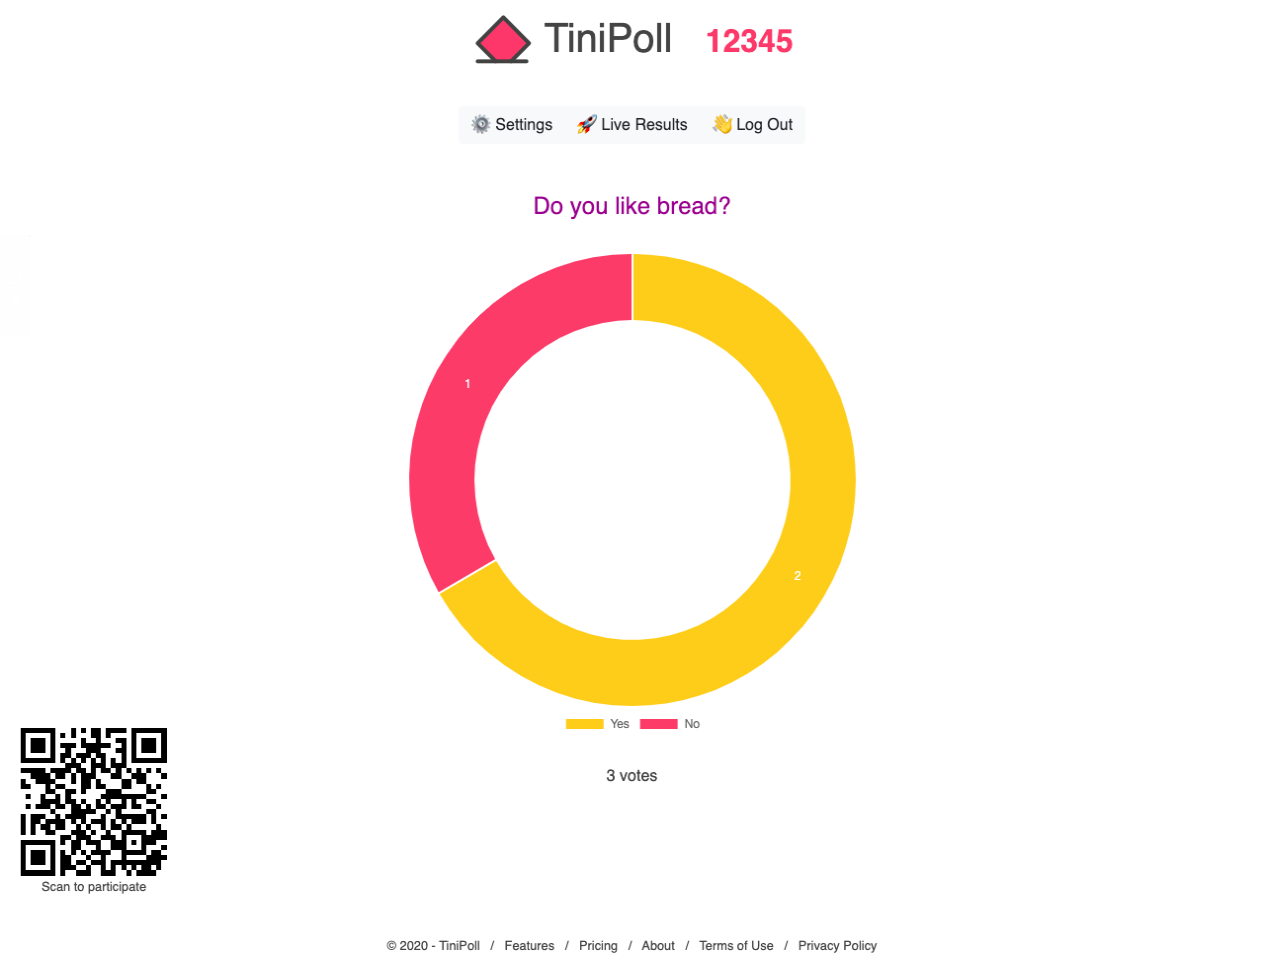 Get feedback from a vast remote working audience about TiniPoll